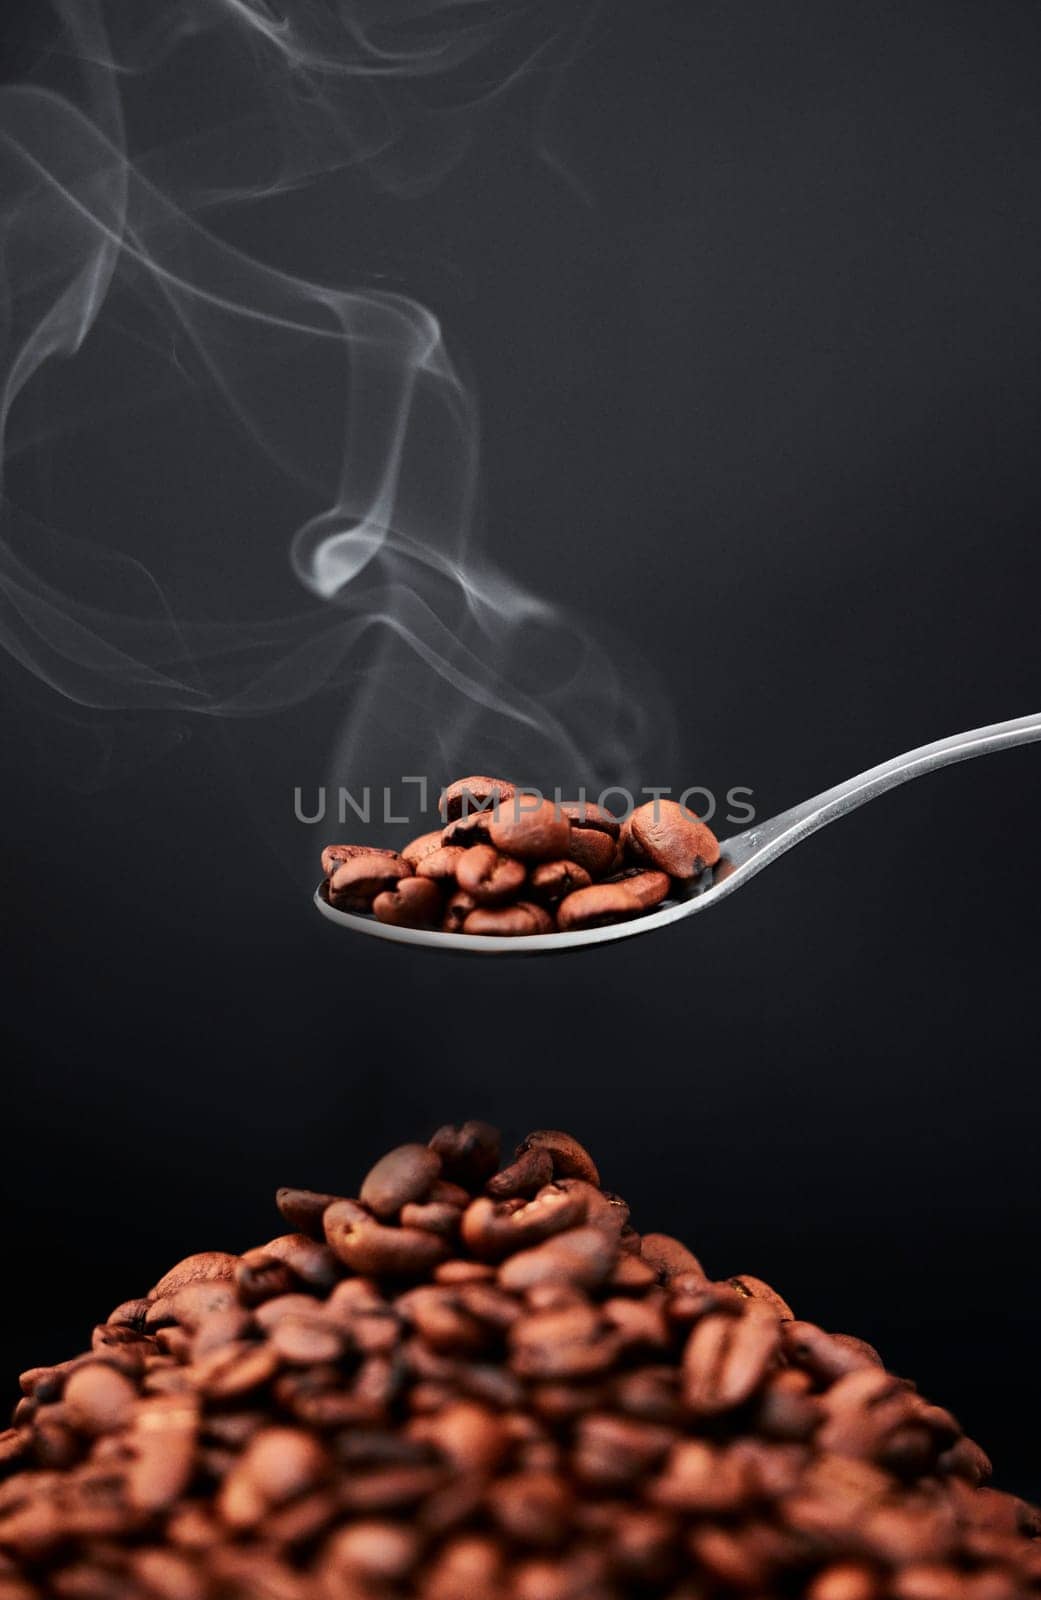 Studio, coffee beans and smoke aroma on spoon or organic diet, roast flavor and black background. Art, seeds and texture of raw ingredient for espresso or scent, cappuccino and steam on mockup space.